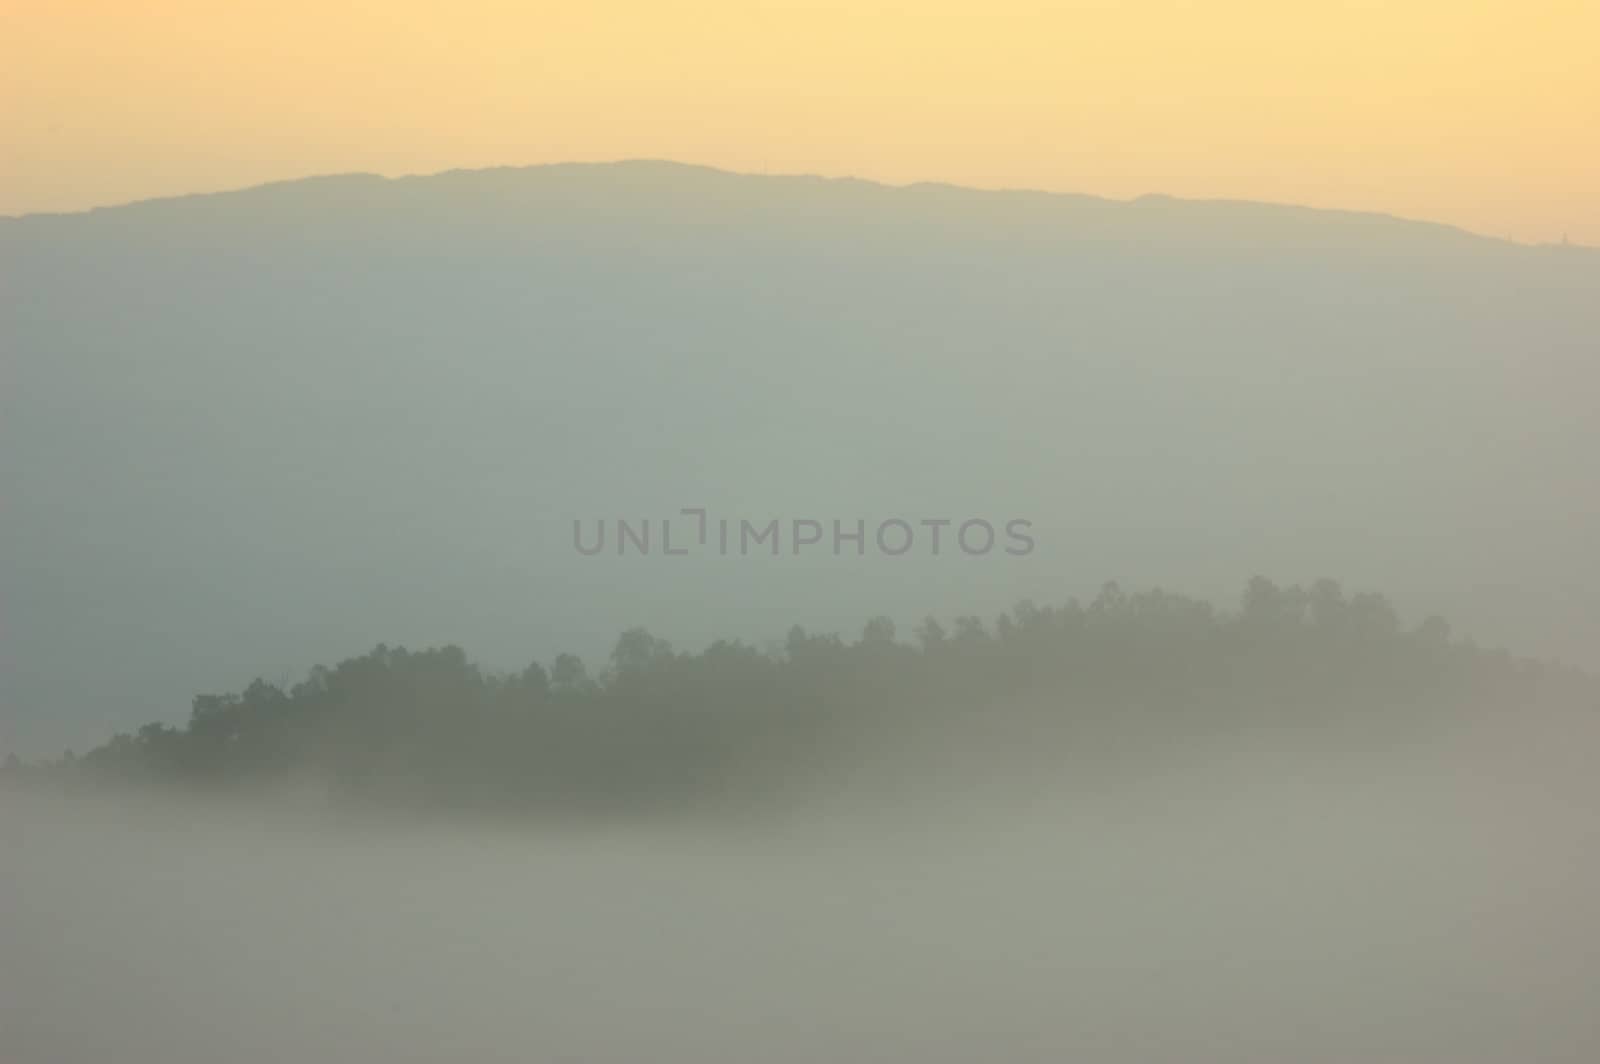 Sunrise in the morning mist cover pine tree forest form Chiangma by ngungfoto